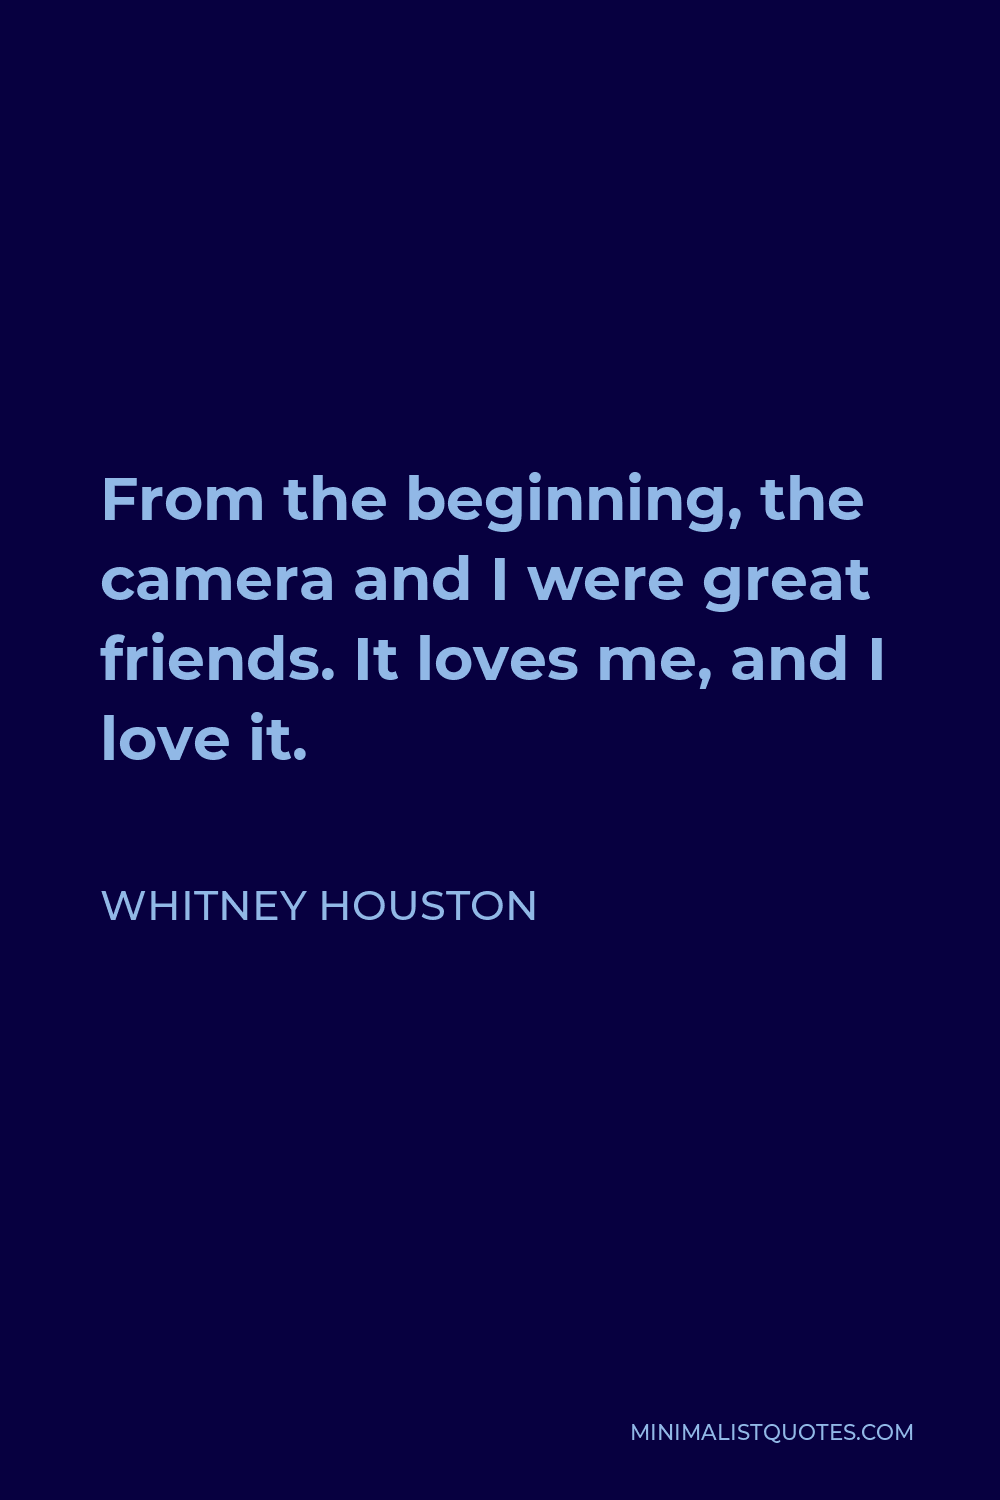 Whitney Houston Quote - From the beginning, the camera and I were great friends. It loves me, and I love it.